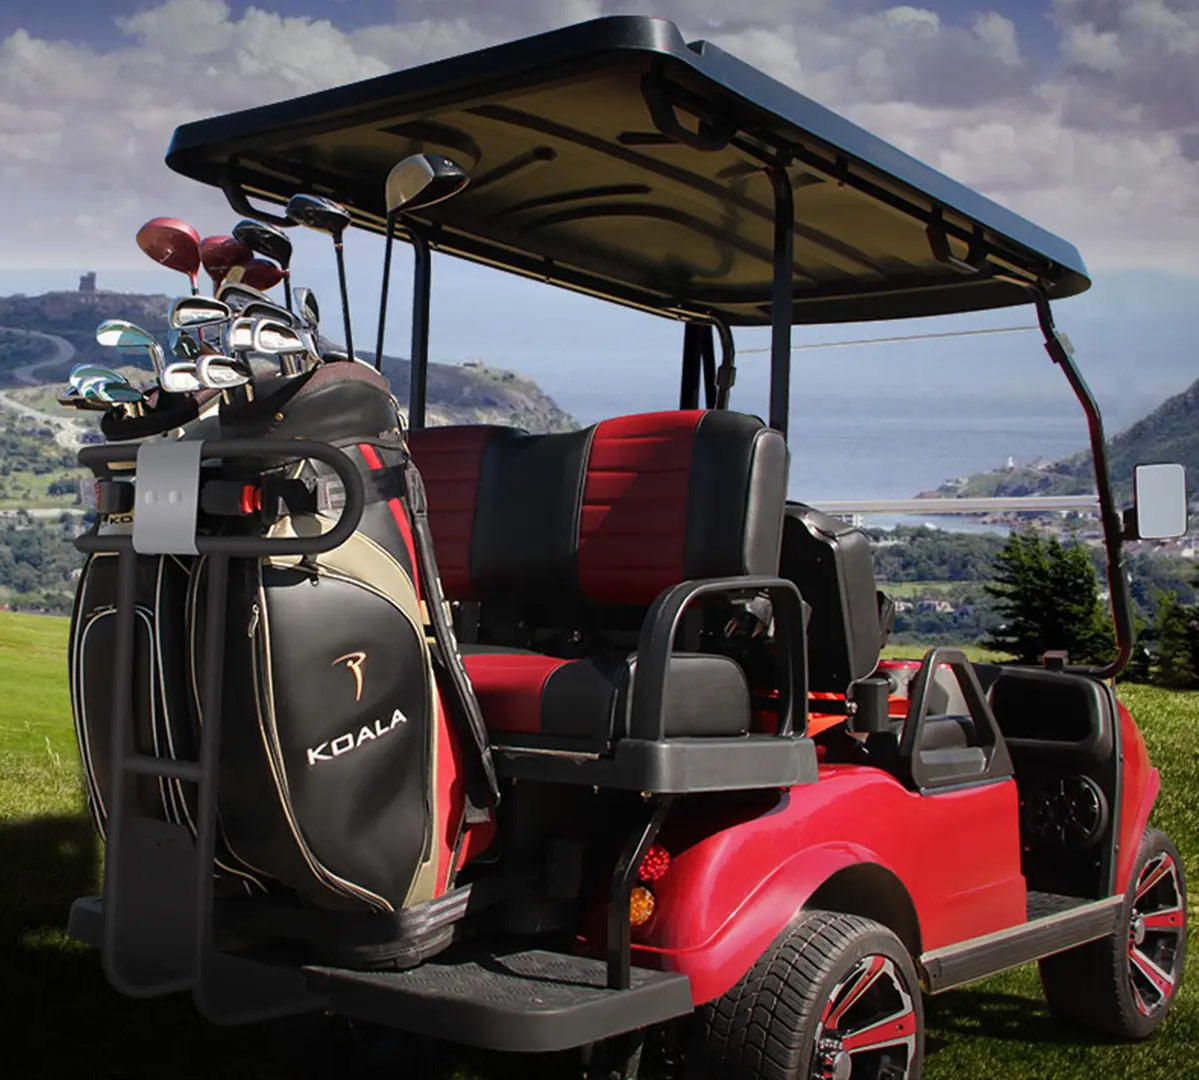 Golf Cart Review: Evolution Classic-4 Golf Cart for Southern California